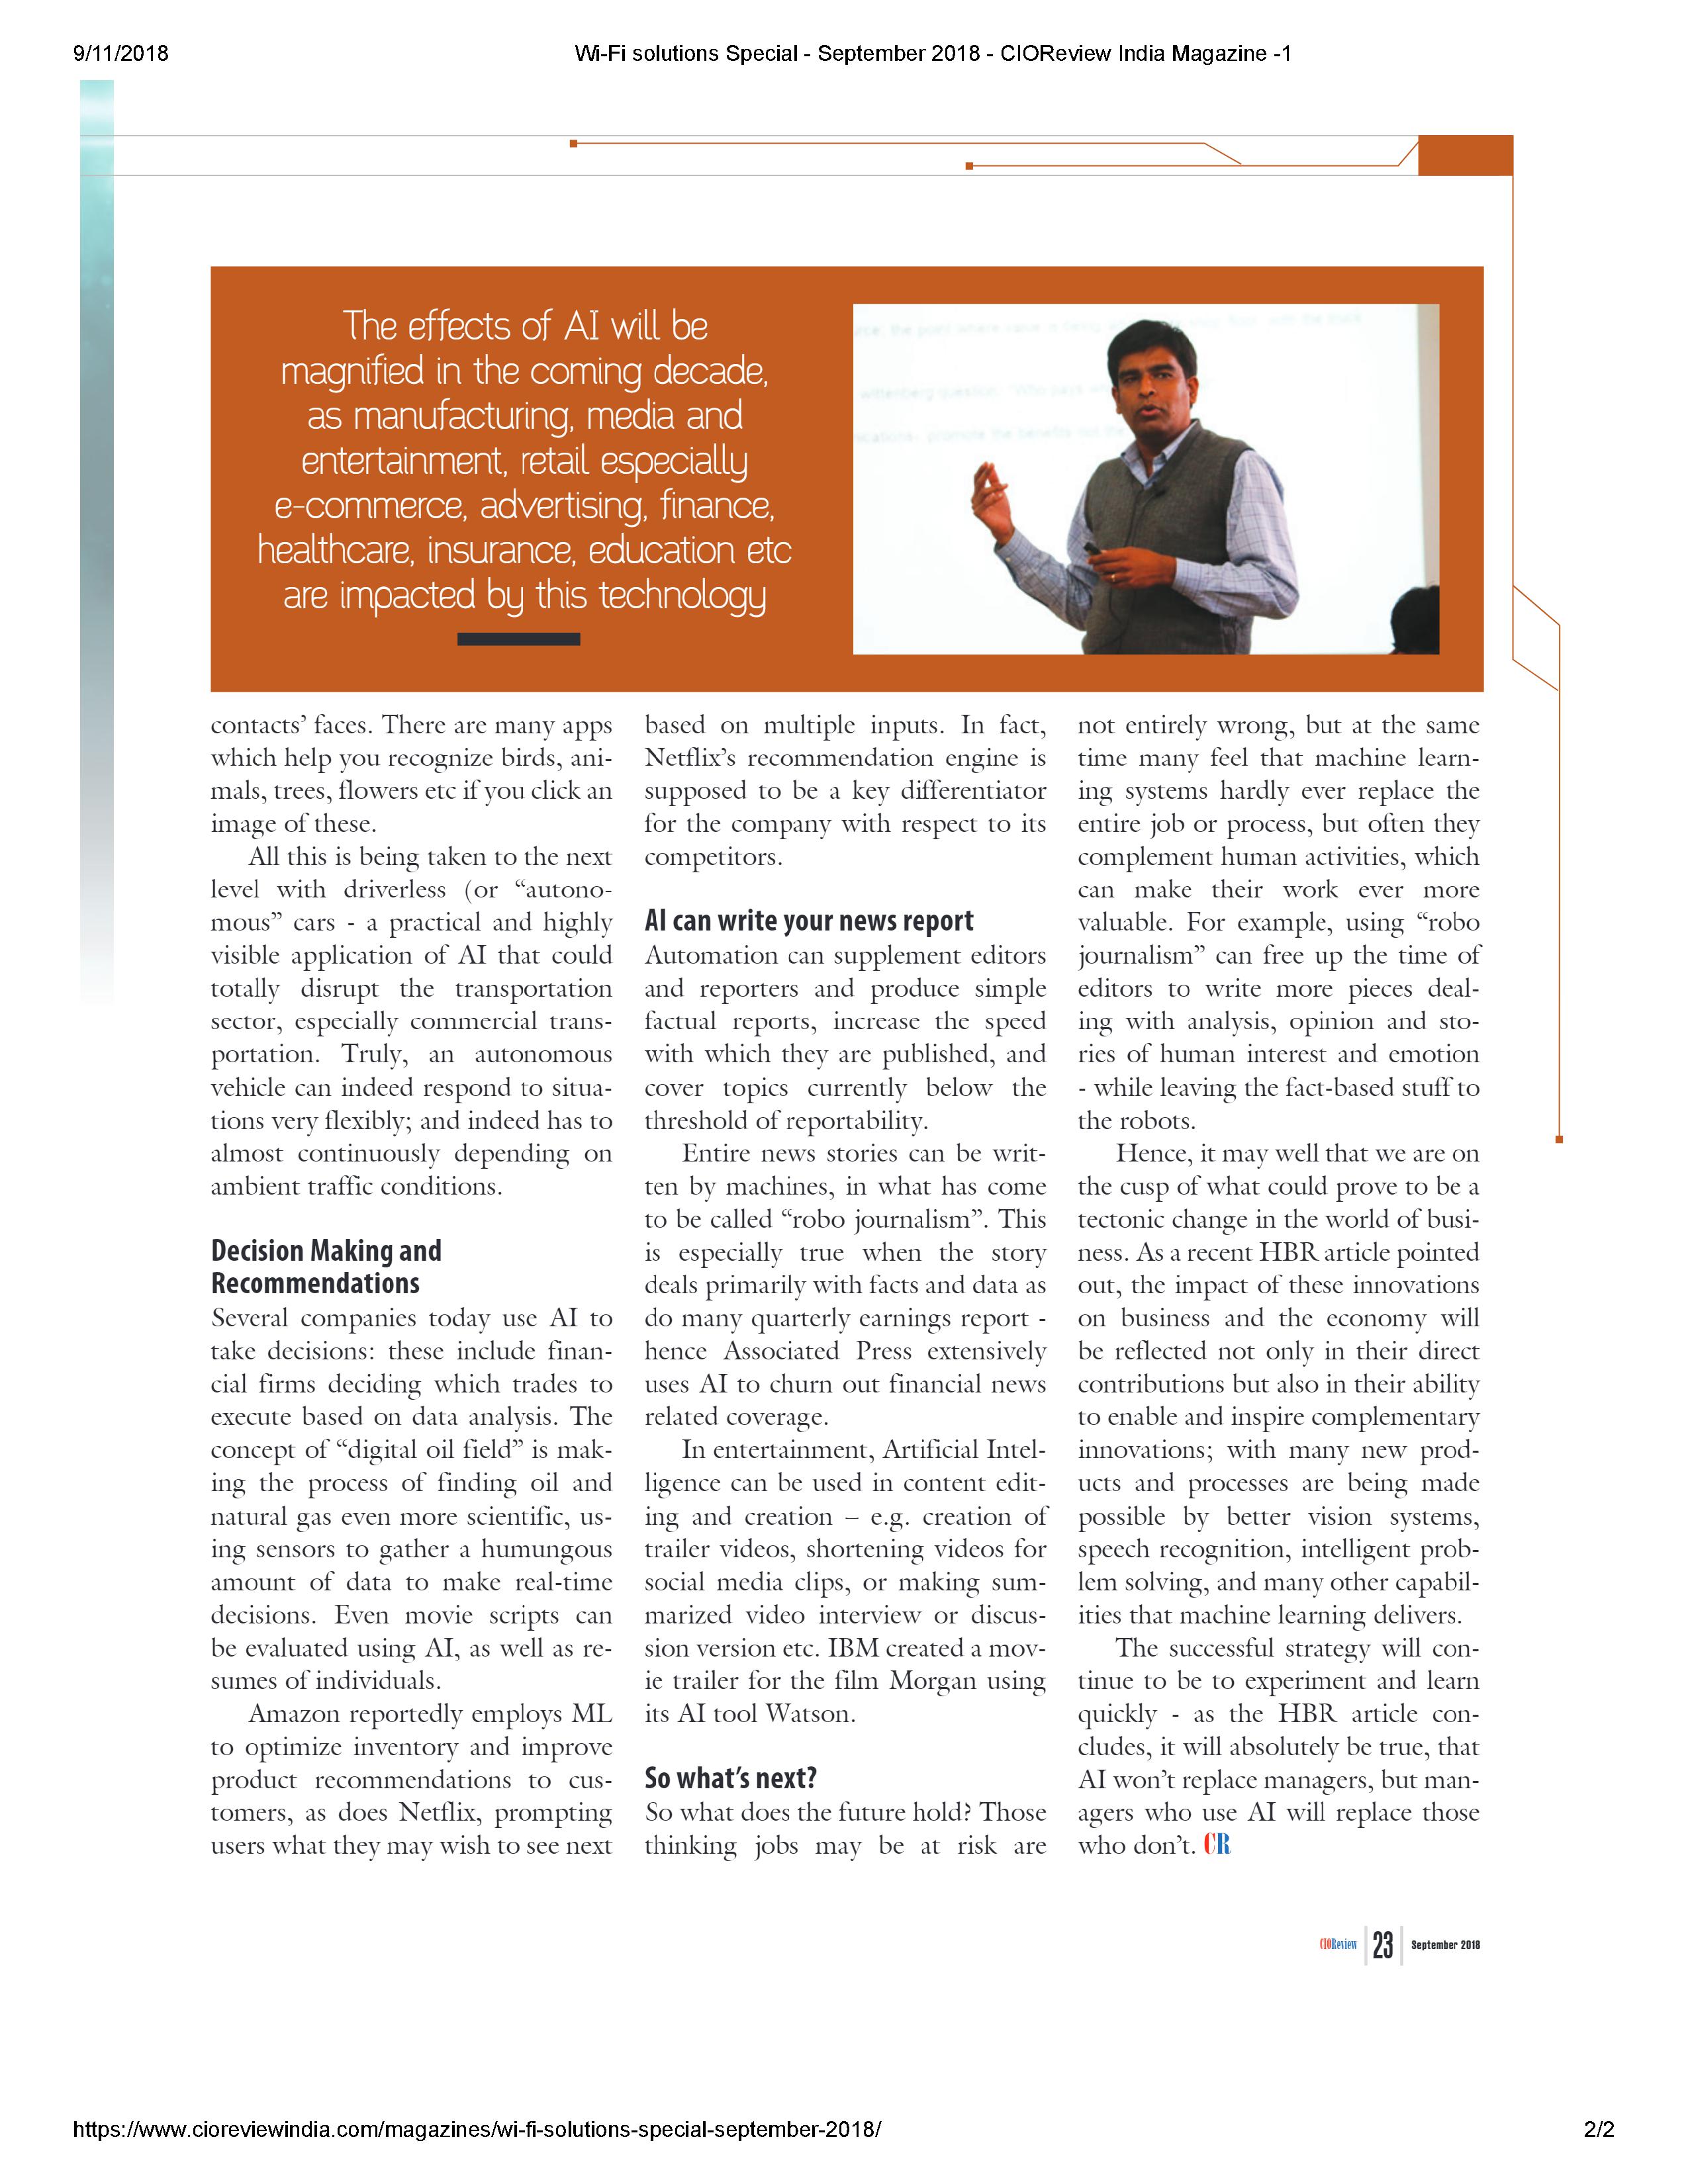 Wi-Fi solutions Special - September 2018 - CIOReview India Magazine -1-2